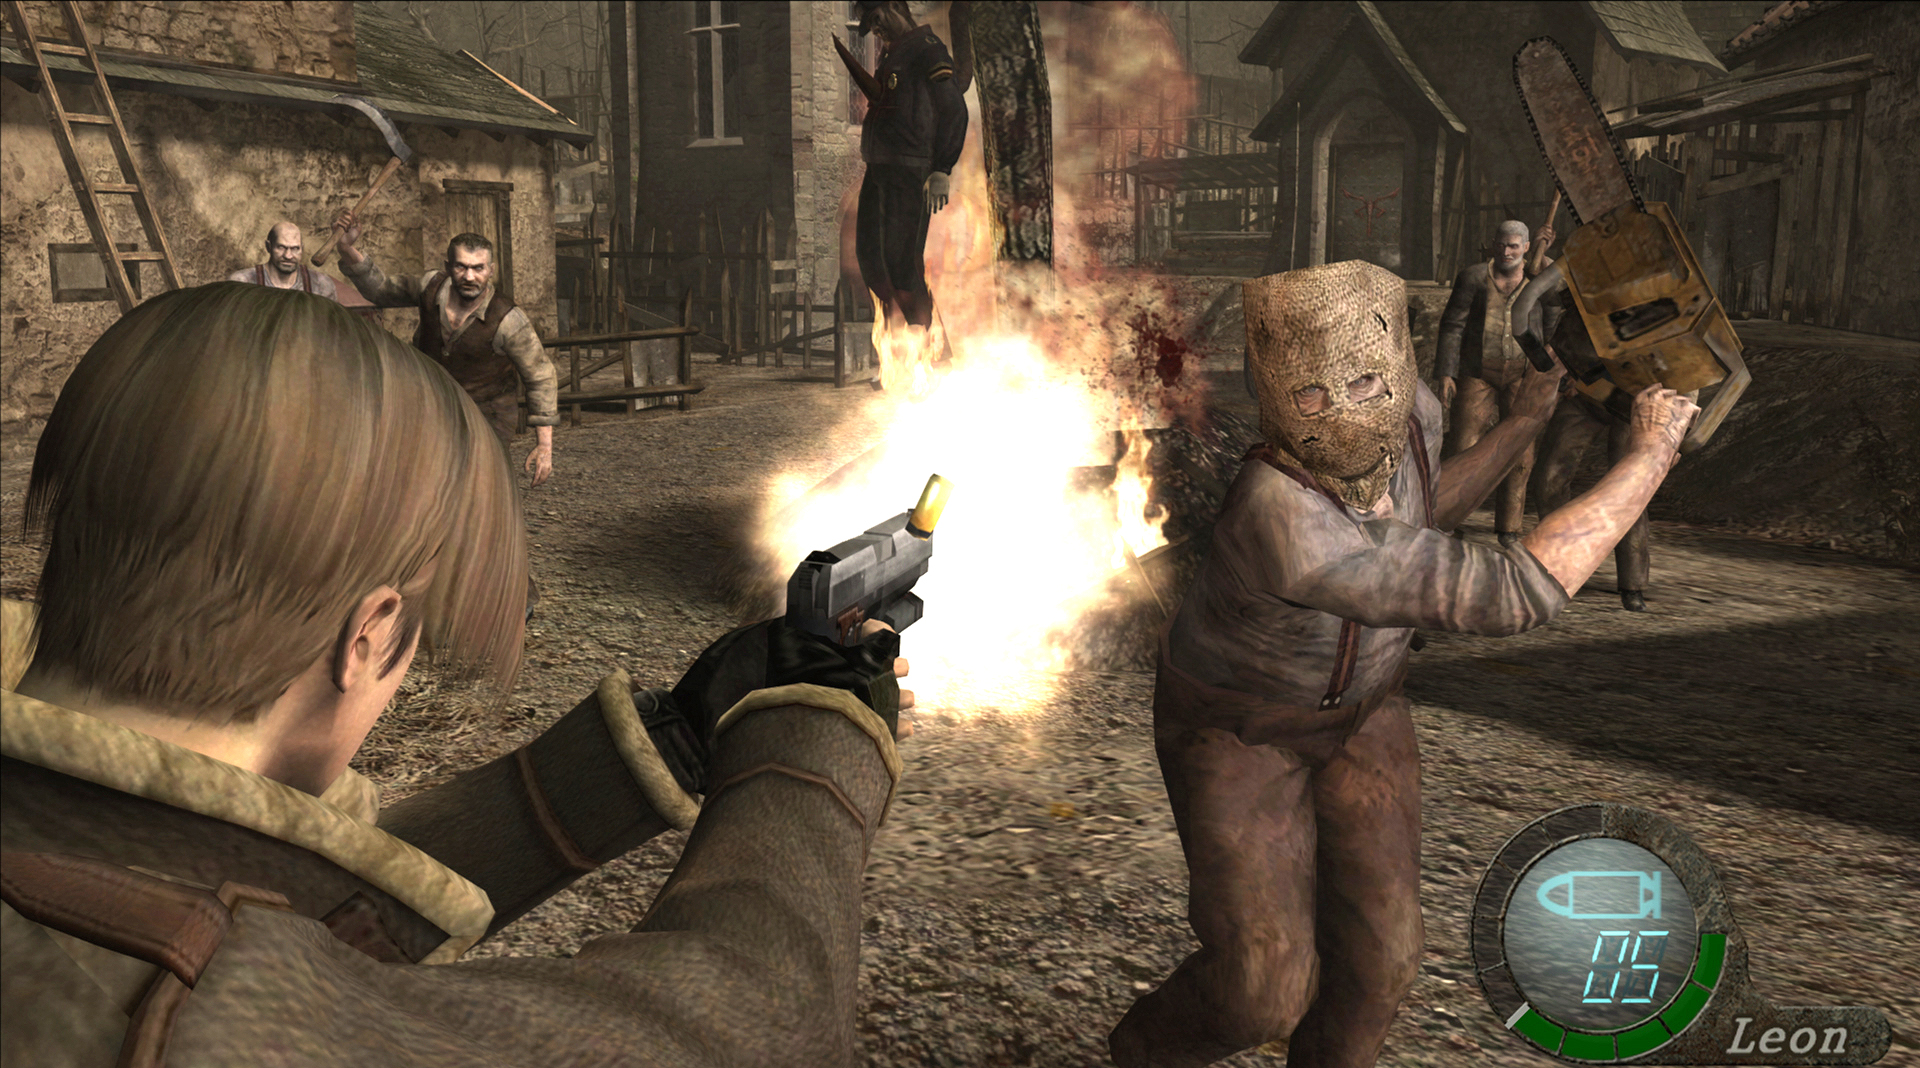 Leon Kennedy shooting a zombie